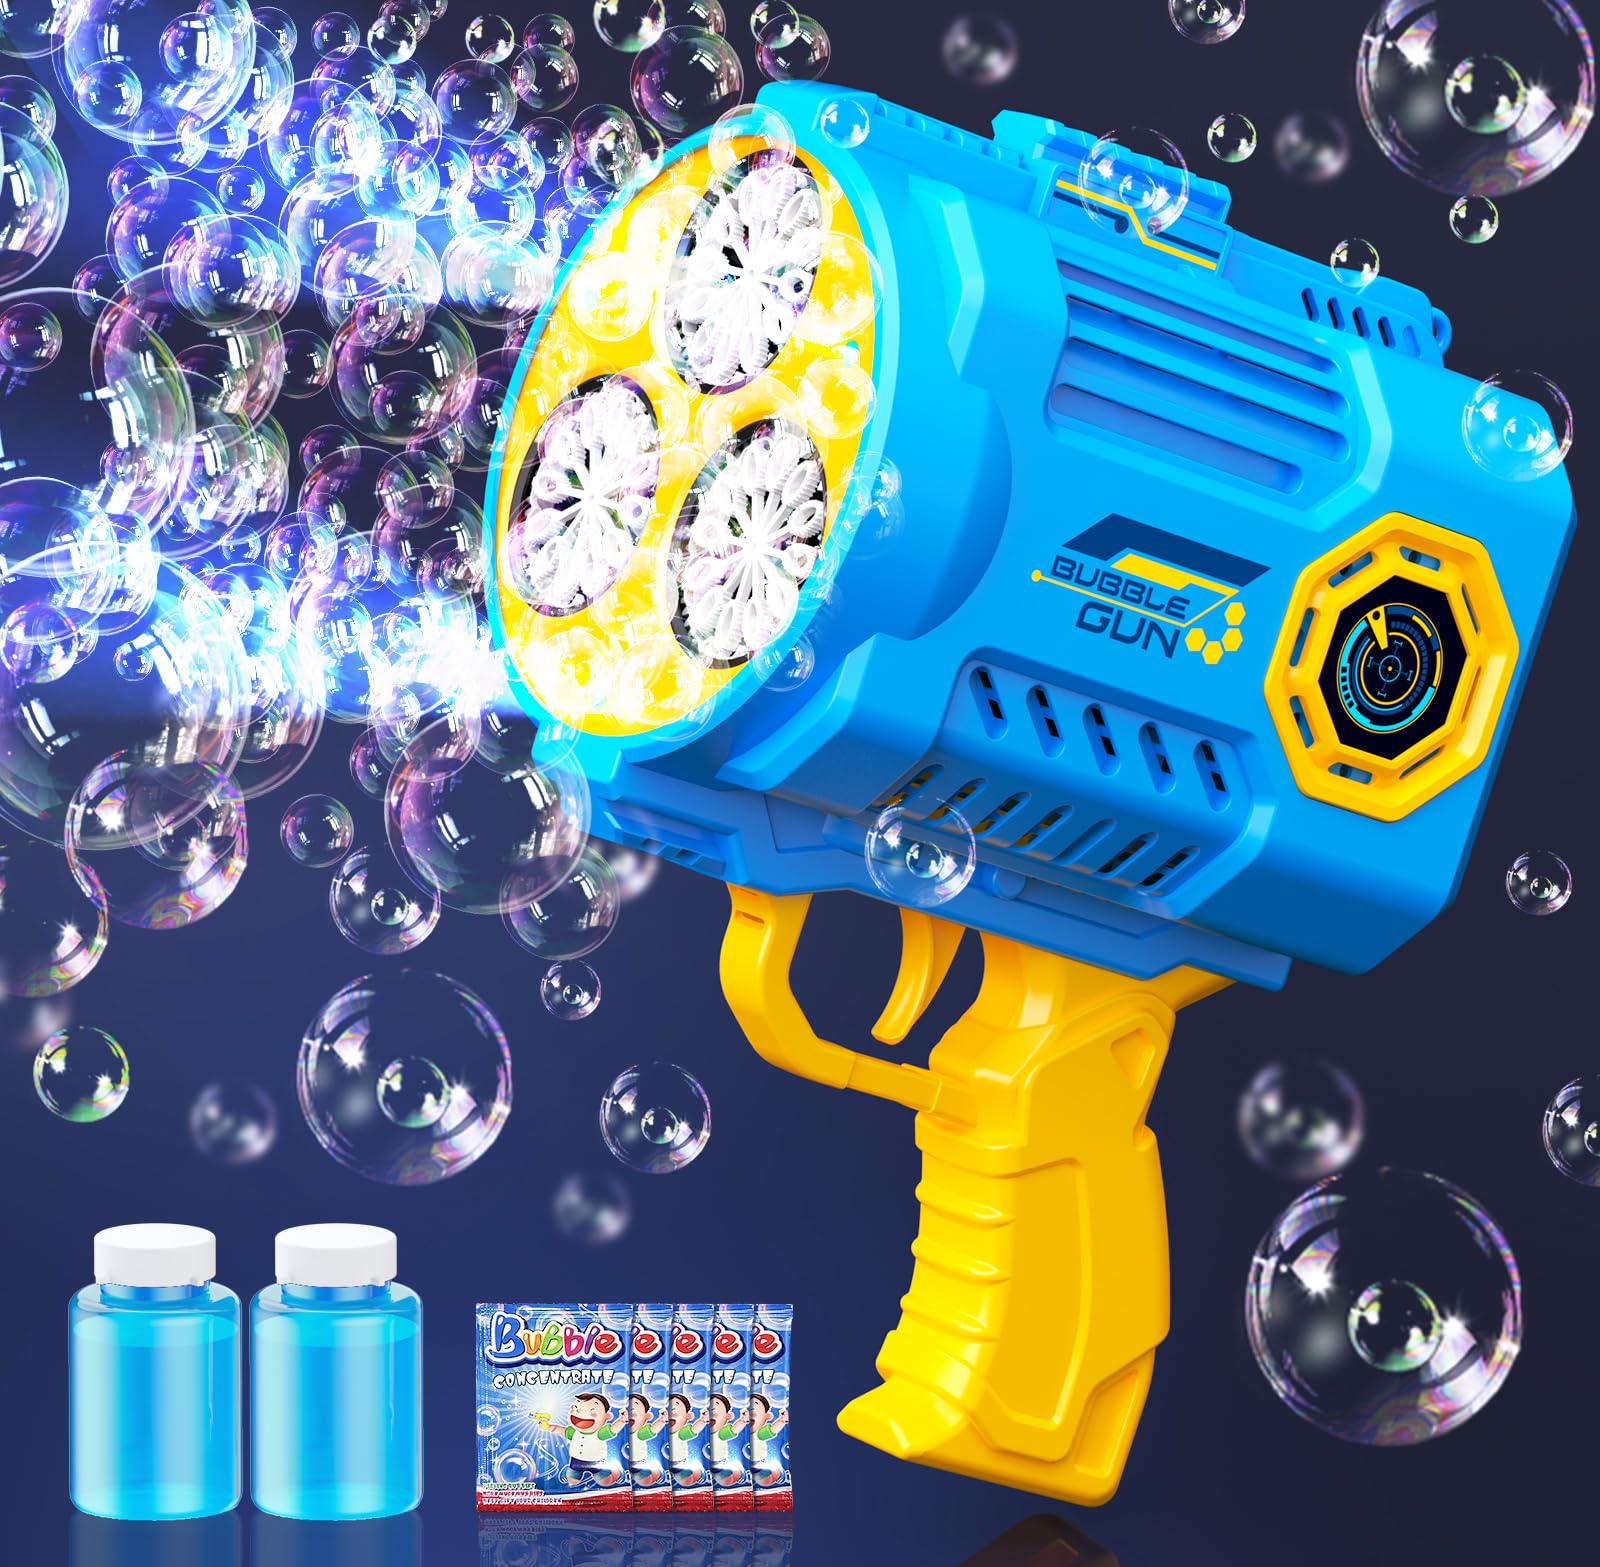 Vewaci Bubble Machine Gun [10,000 Bubbles/Min] [LED Light] Bazooka Bubble Gun, Rechargeable Bubble Blower for Age 3+ Kids/Adults, Birthday Gift Summer Toy for Outdoor Wedding Party